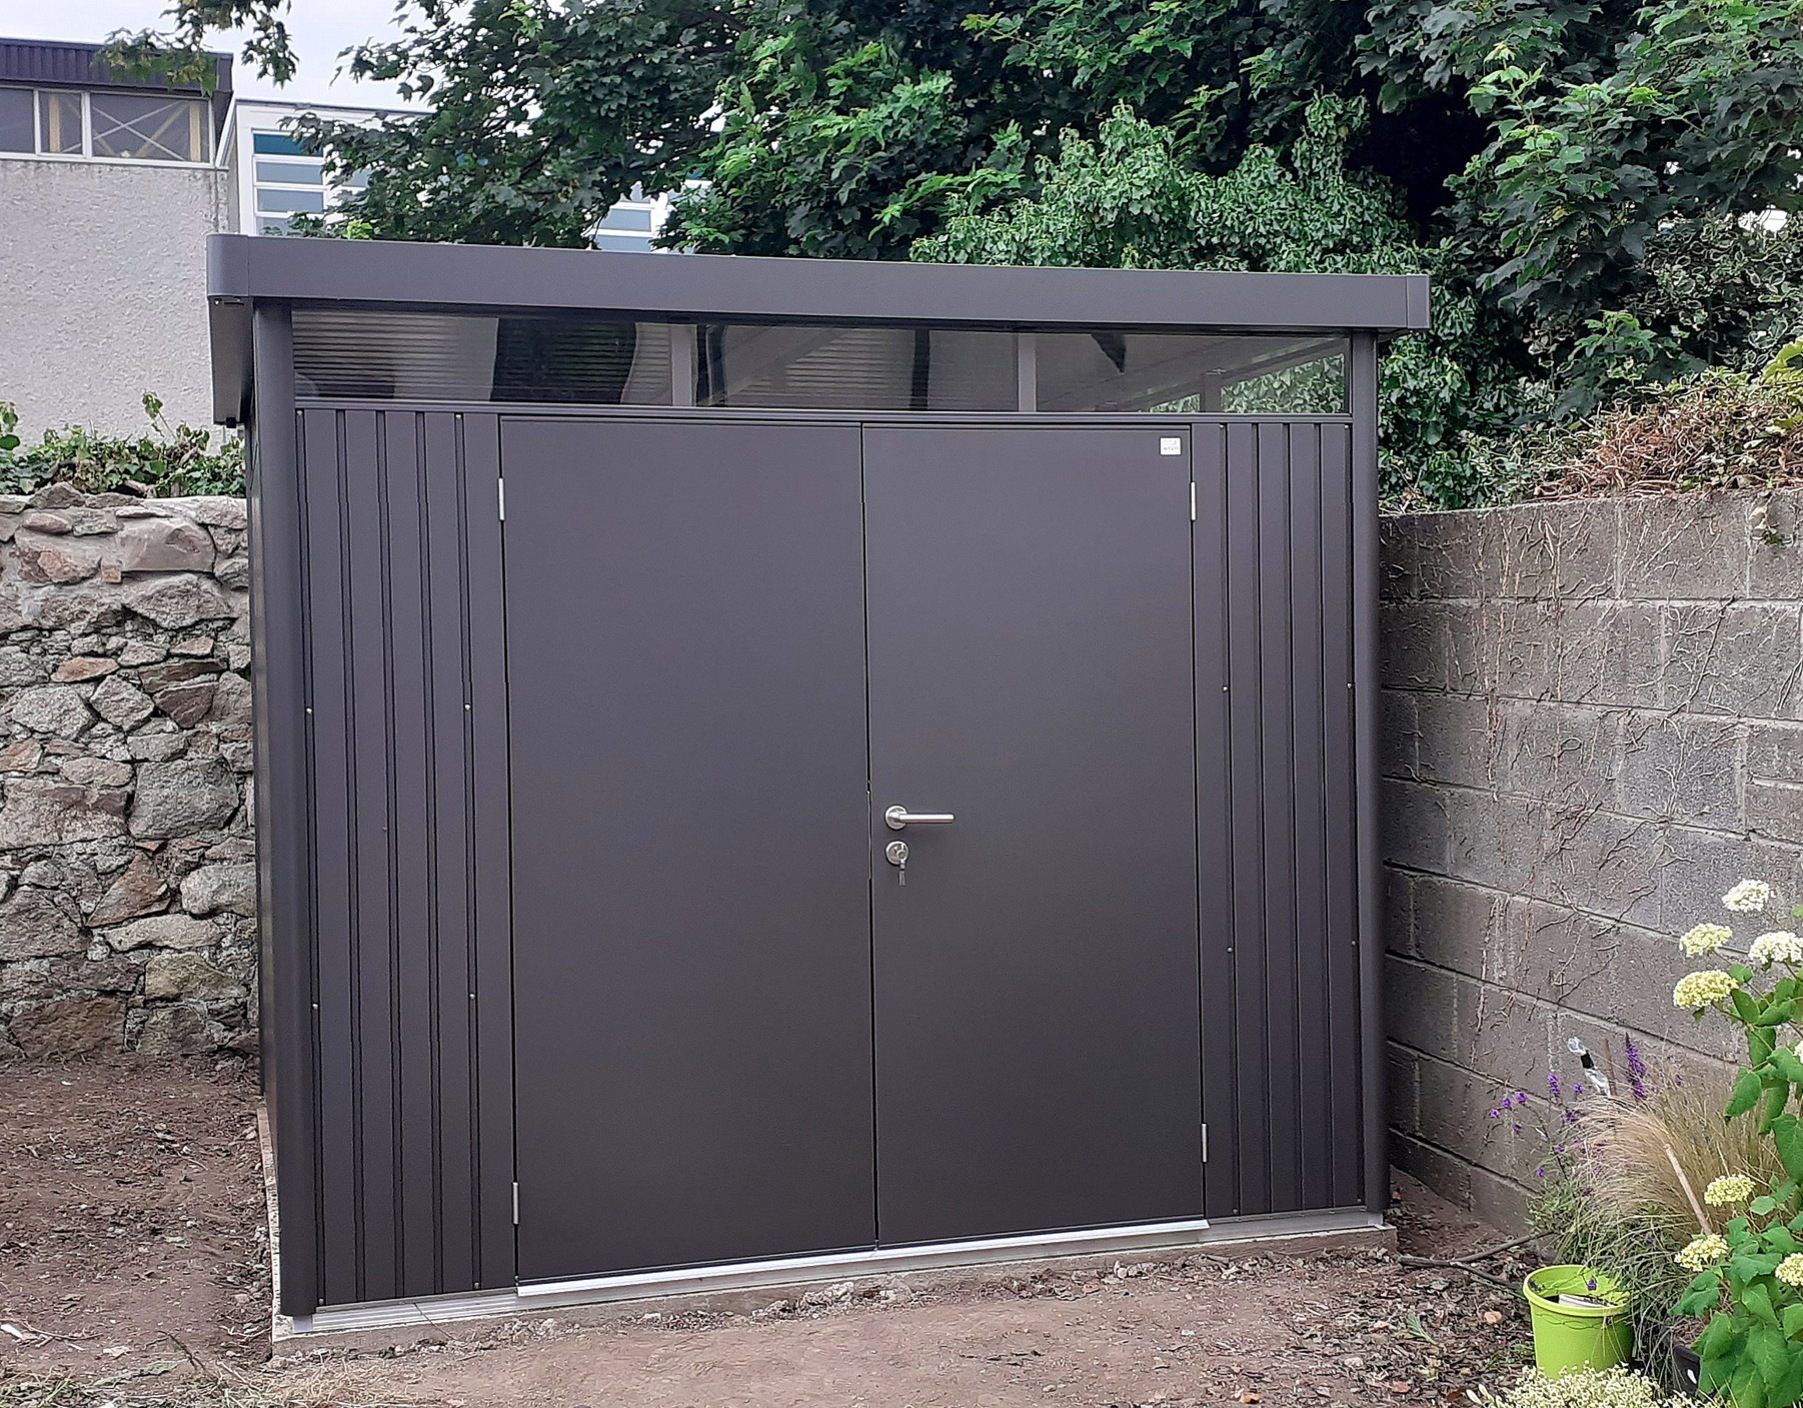 The Biohort HighLine H4 in metallic dark grey with optional accessories including aluminium floor frame & panels, electrical mounting panel |  Supplied + Fitted in Clonskeagh, Dublin 14 by Owen Chubb